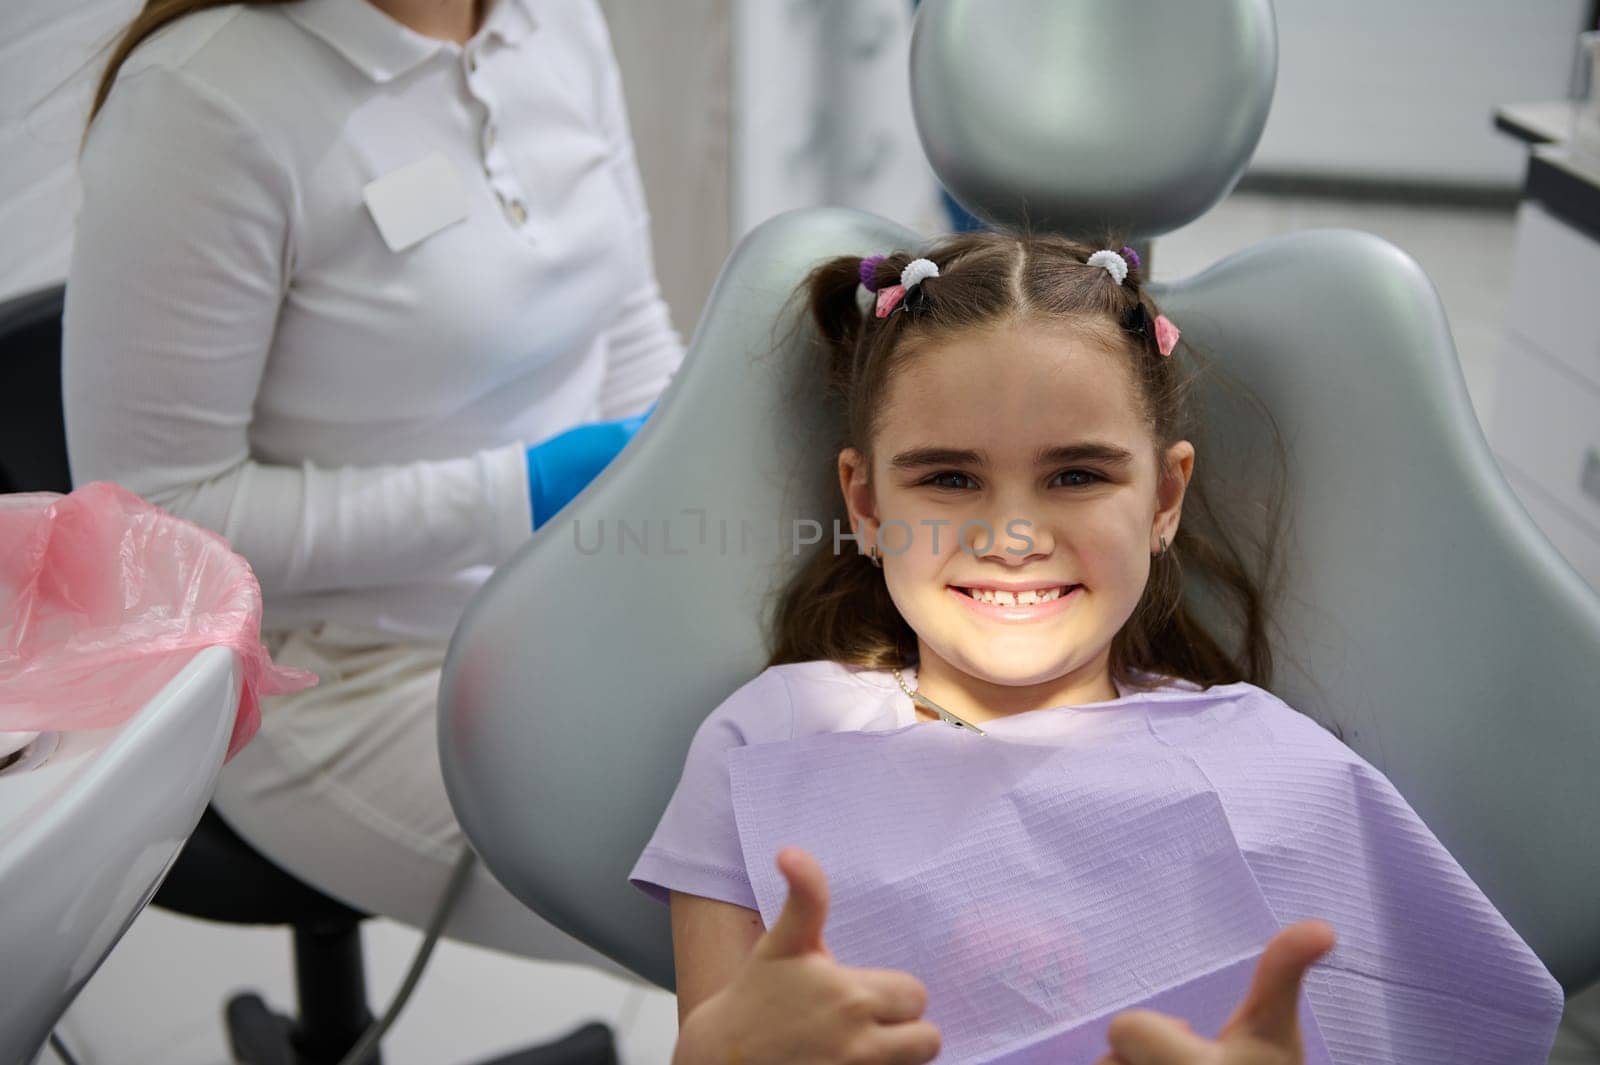 Little girl at dentist appointment, sitting on dental chair, smiling showing thumbs up after preventive dental check up by artgf